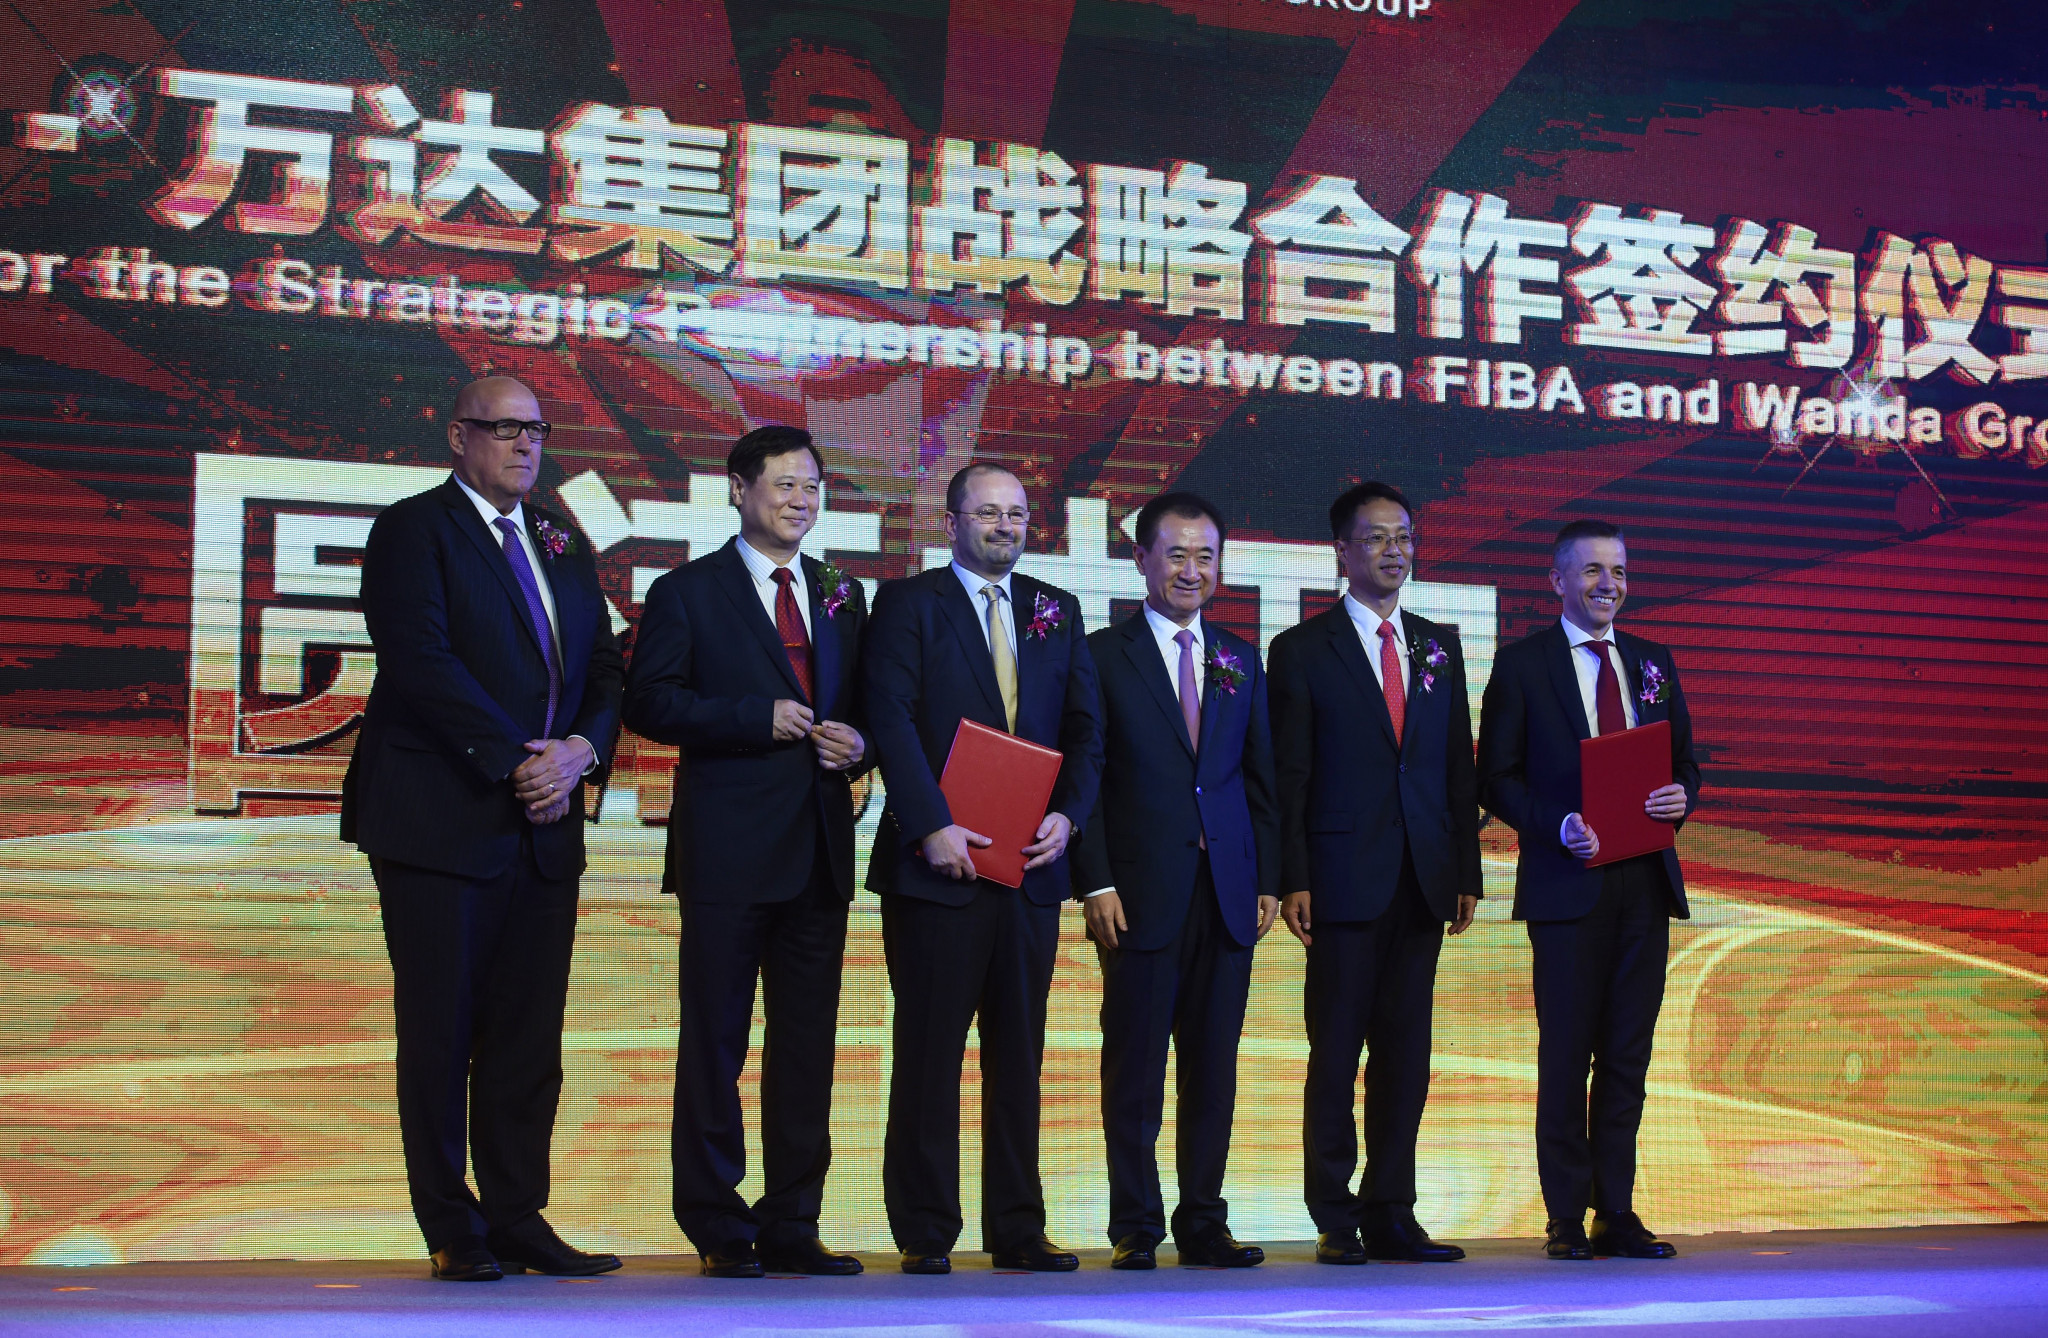 Burton Shipley, left, is chairman of the Coordination Commission for the 2019 FIBA World Cup in China, an event that will be bigger than ever this year after being expanded from 24 to 32 teams ©Getty Images